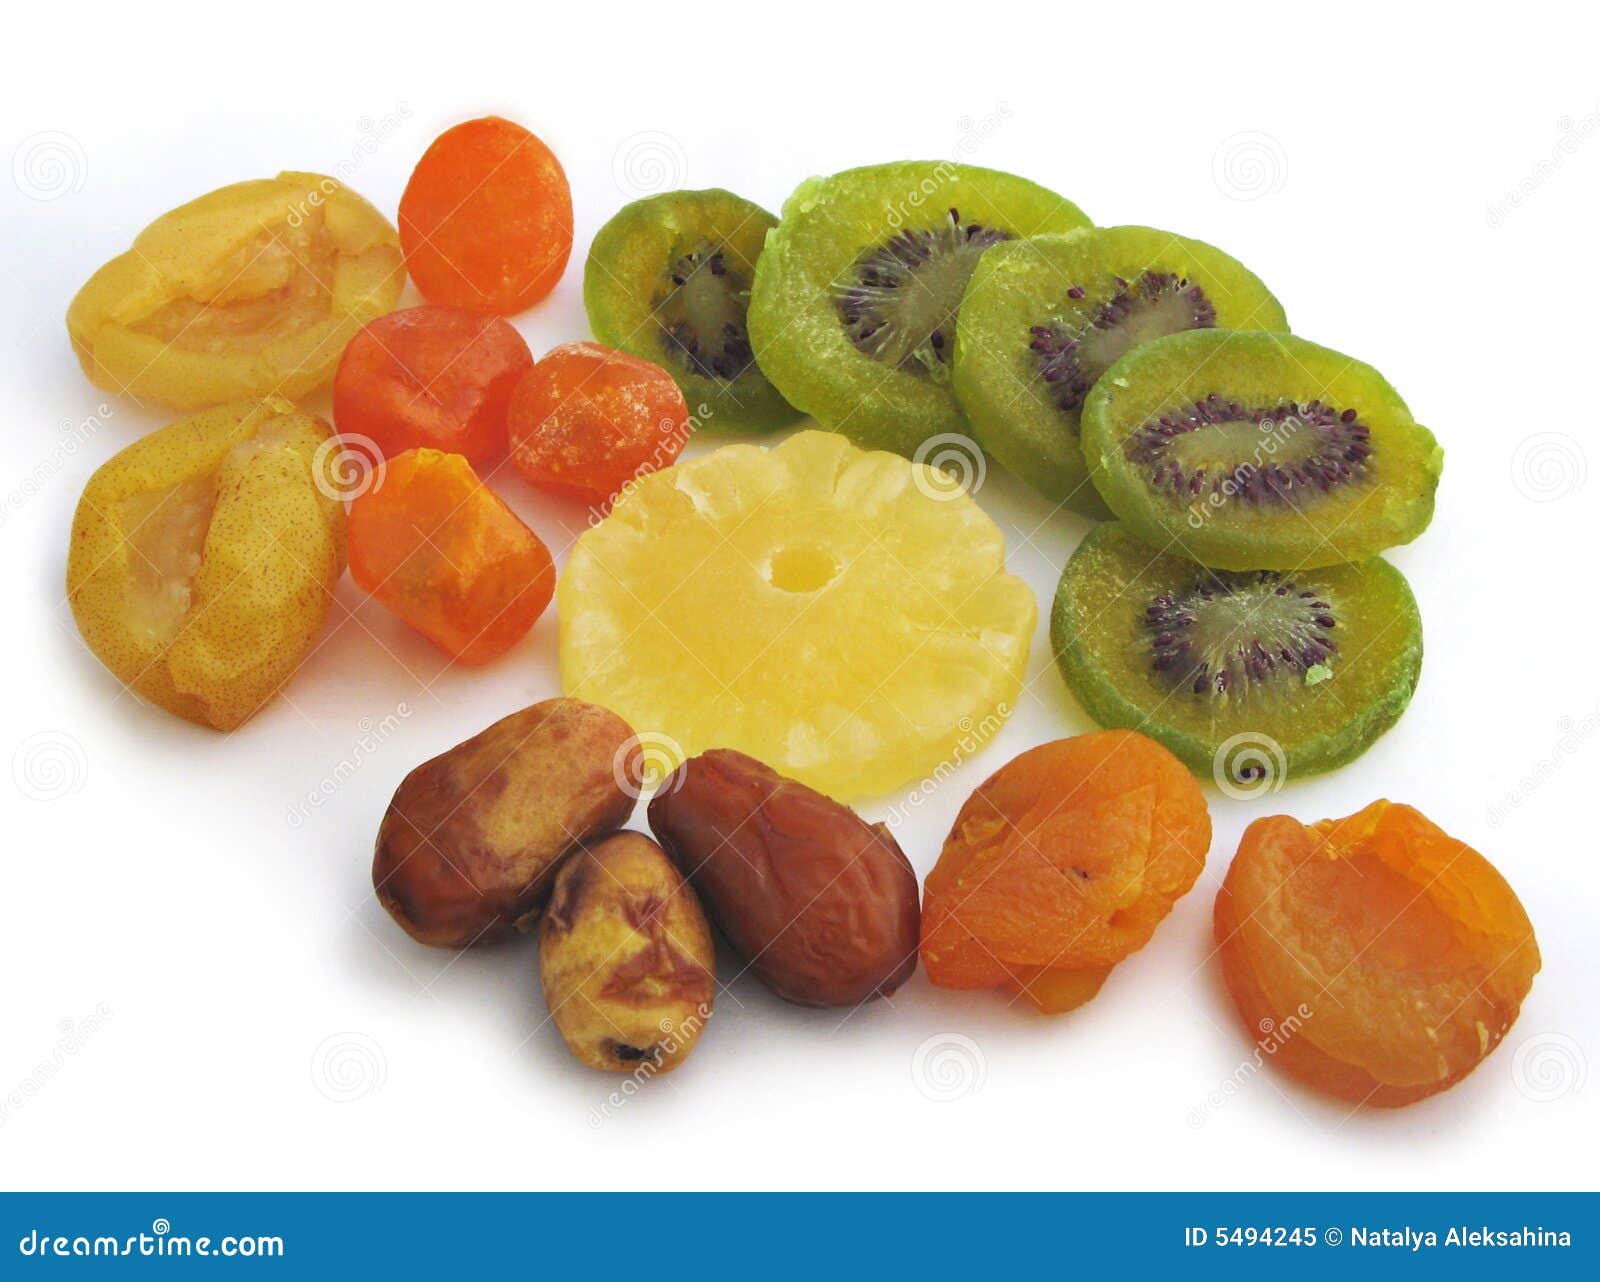 https://thumbs.dreamstime.com/z/candied-fruits-5494245.jpg